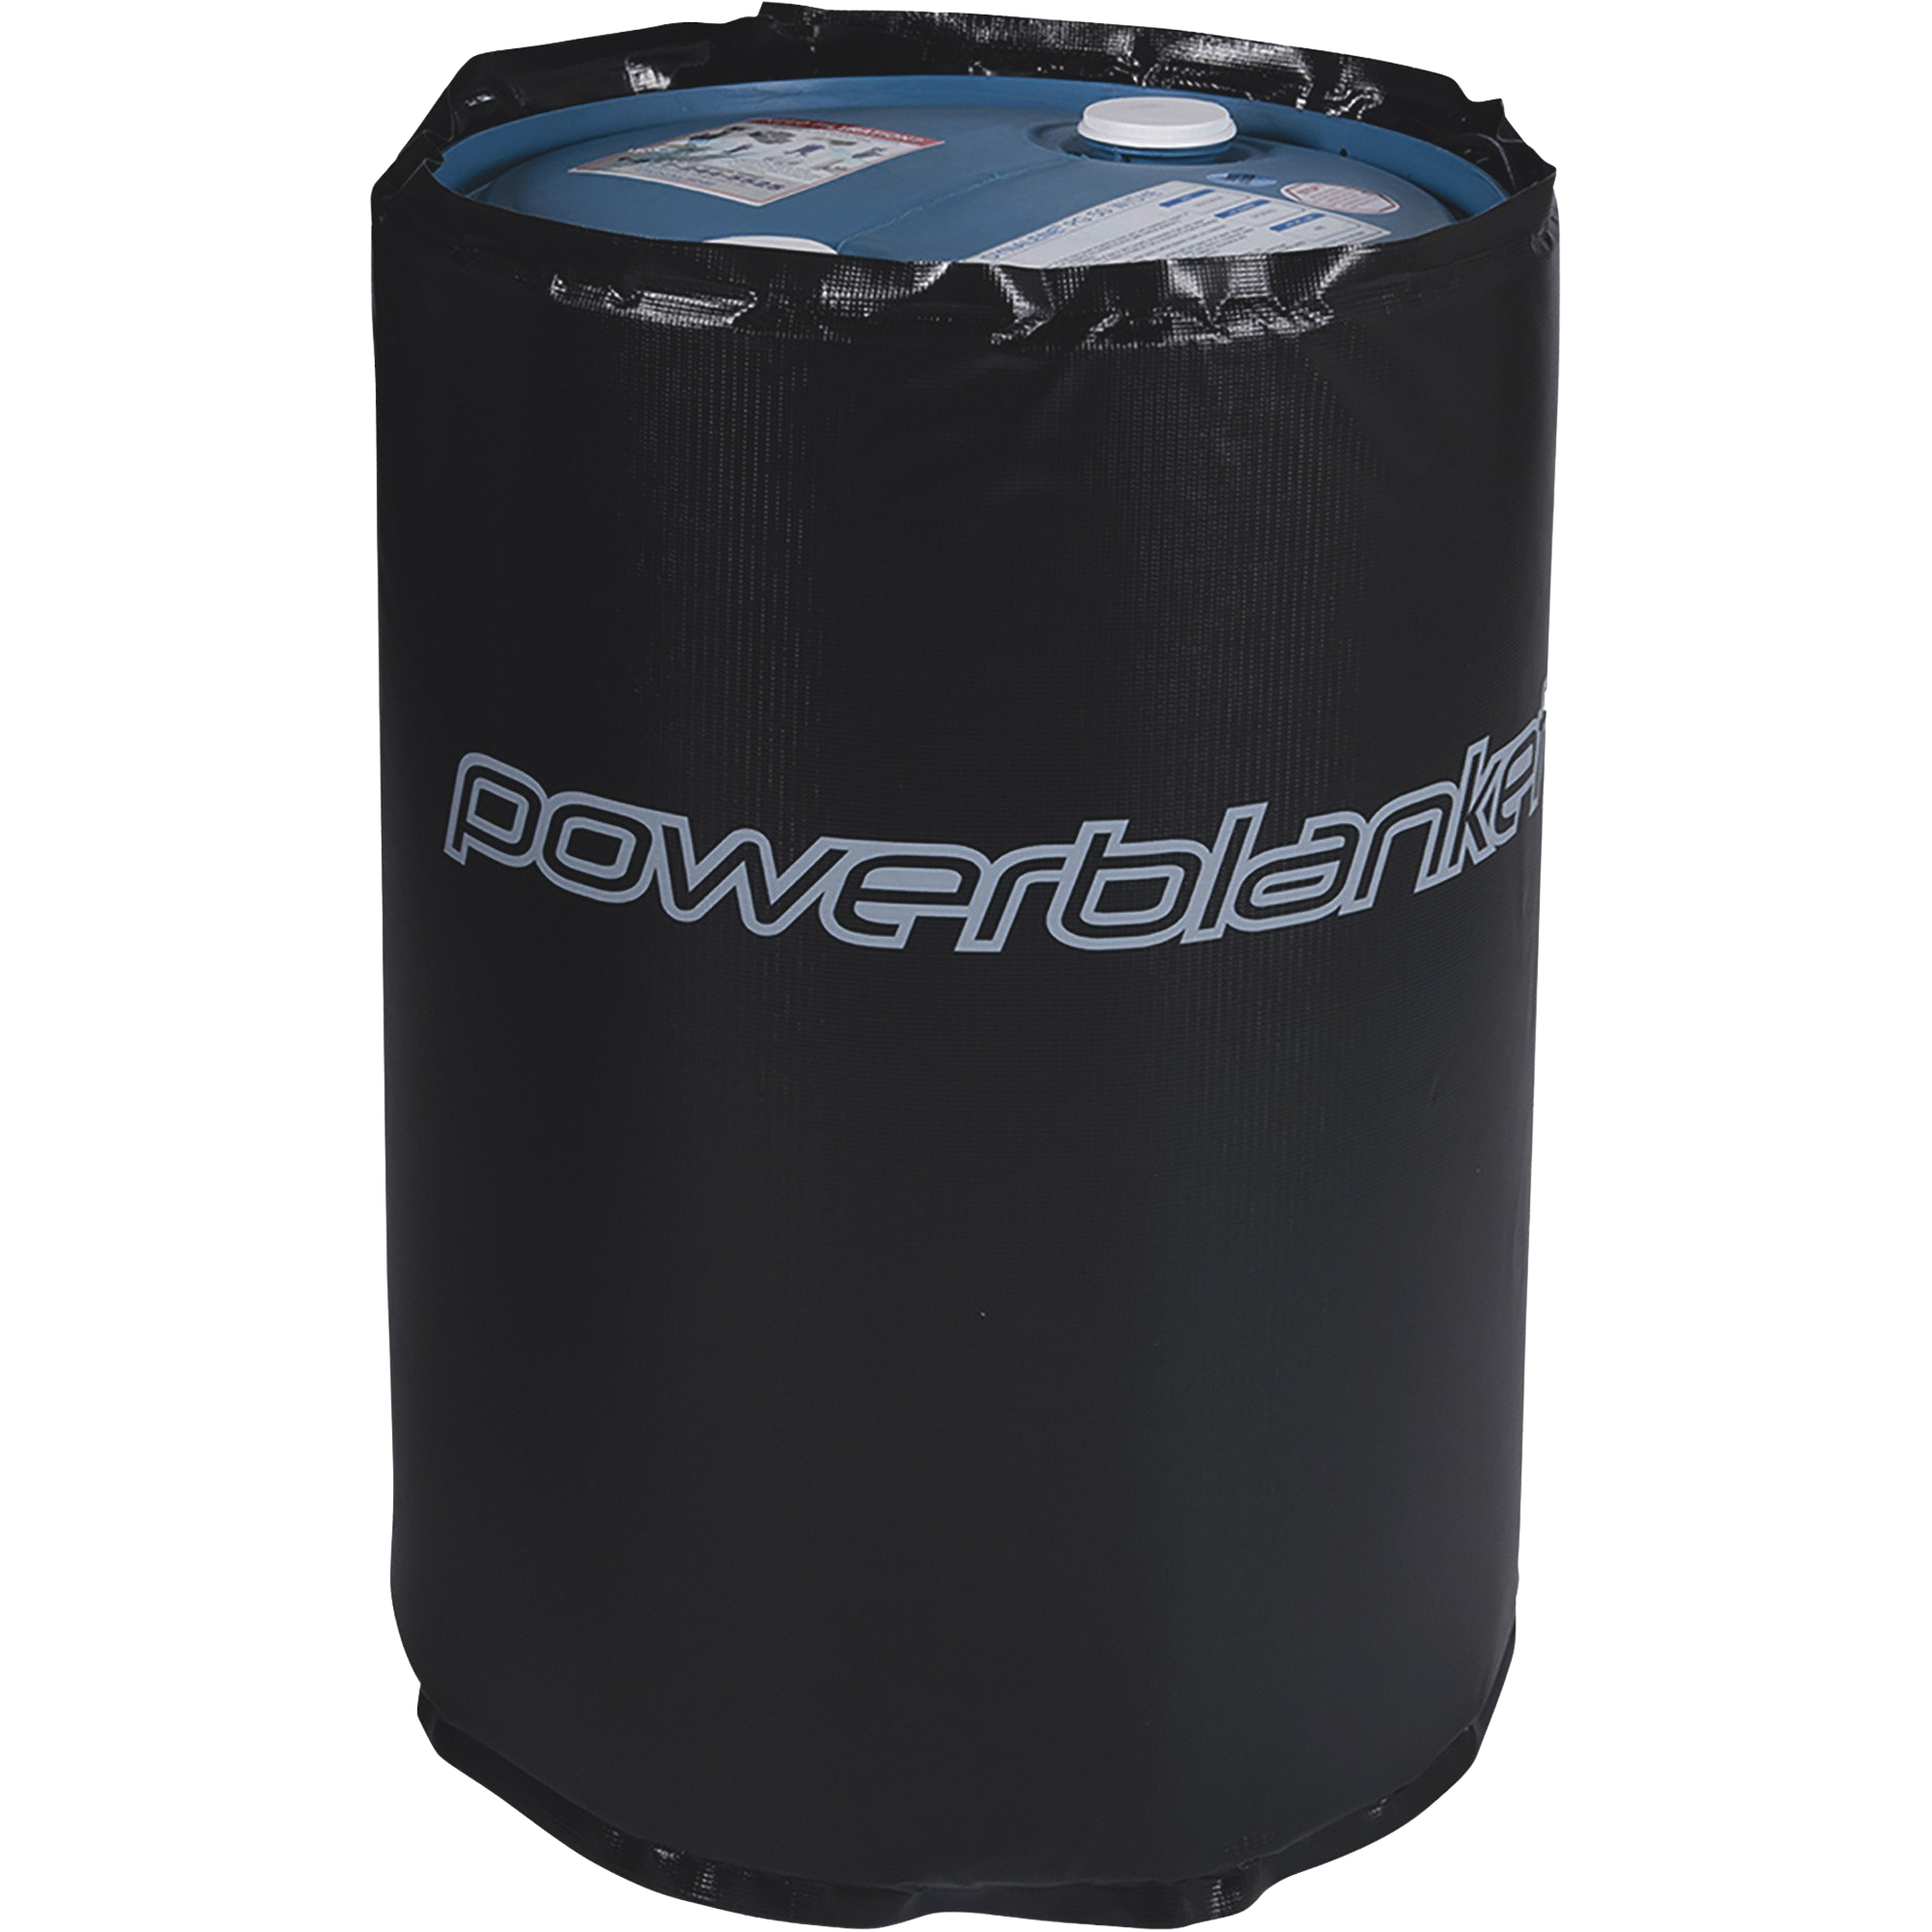 Powerblanket, Powerblanket BH55RR-80 55 Gallon Insulated Drum Heater 80°F Fixed New